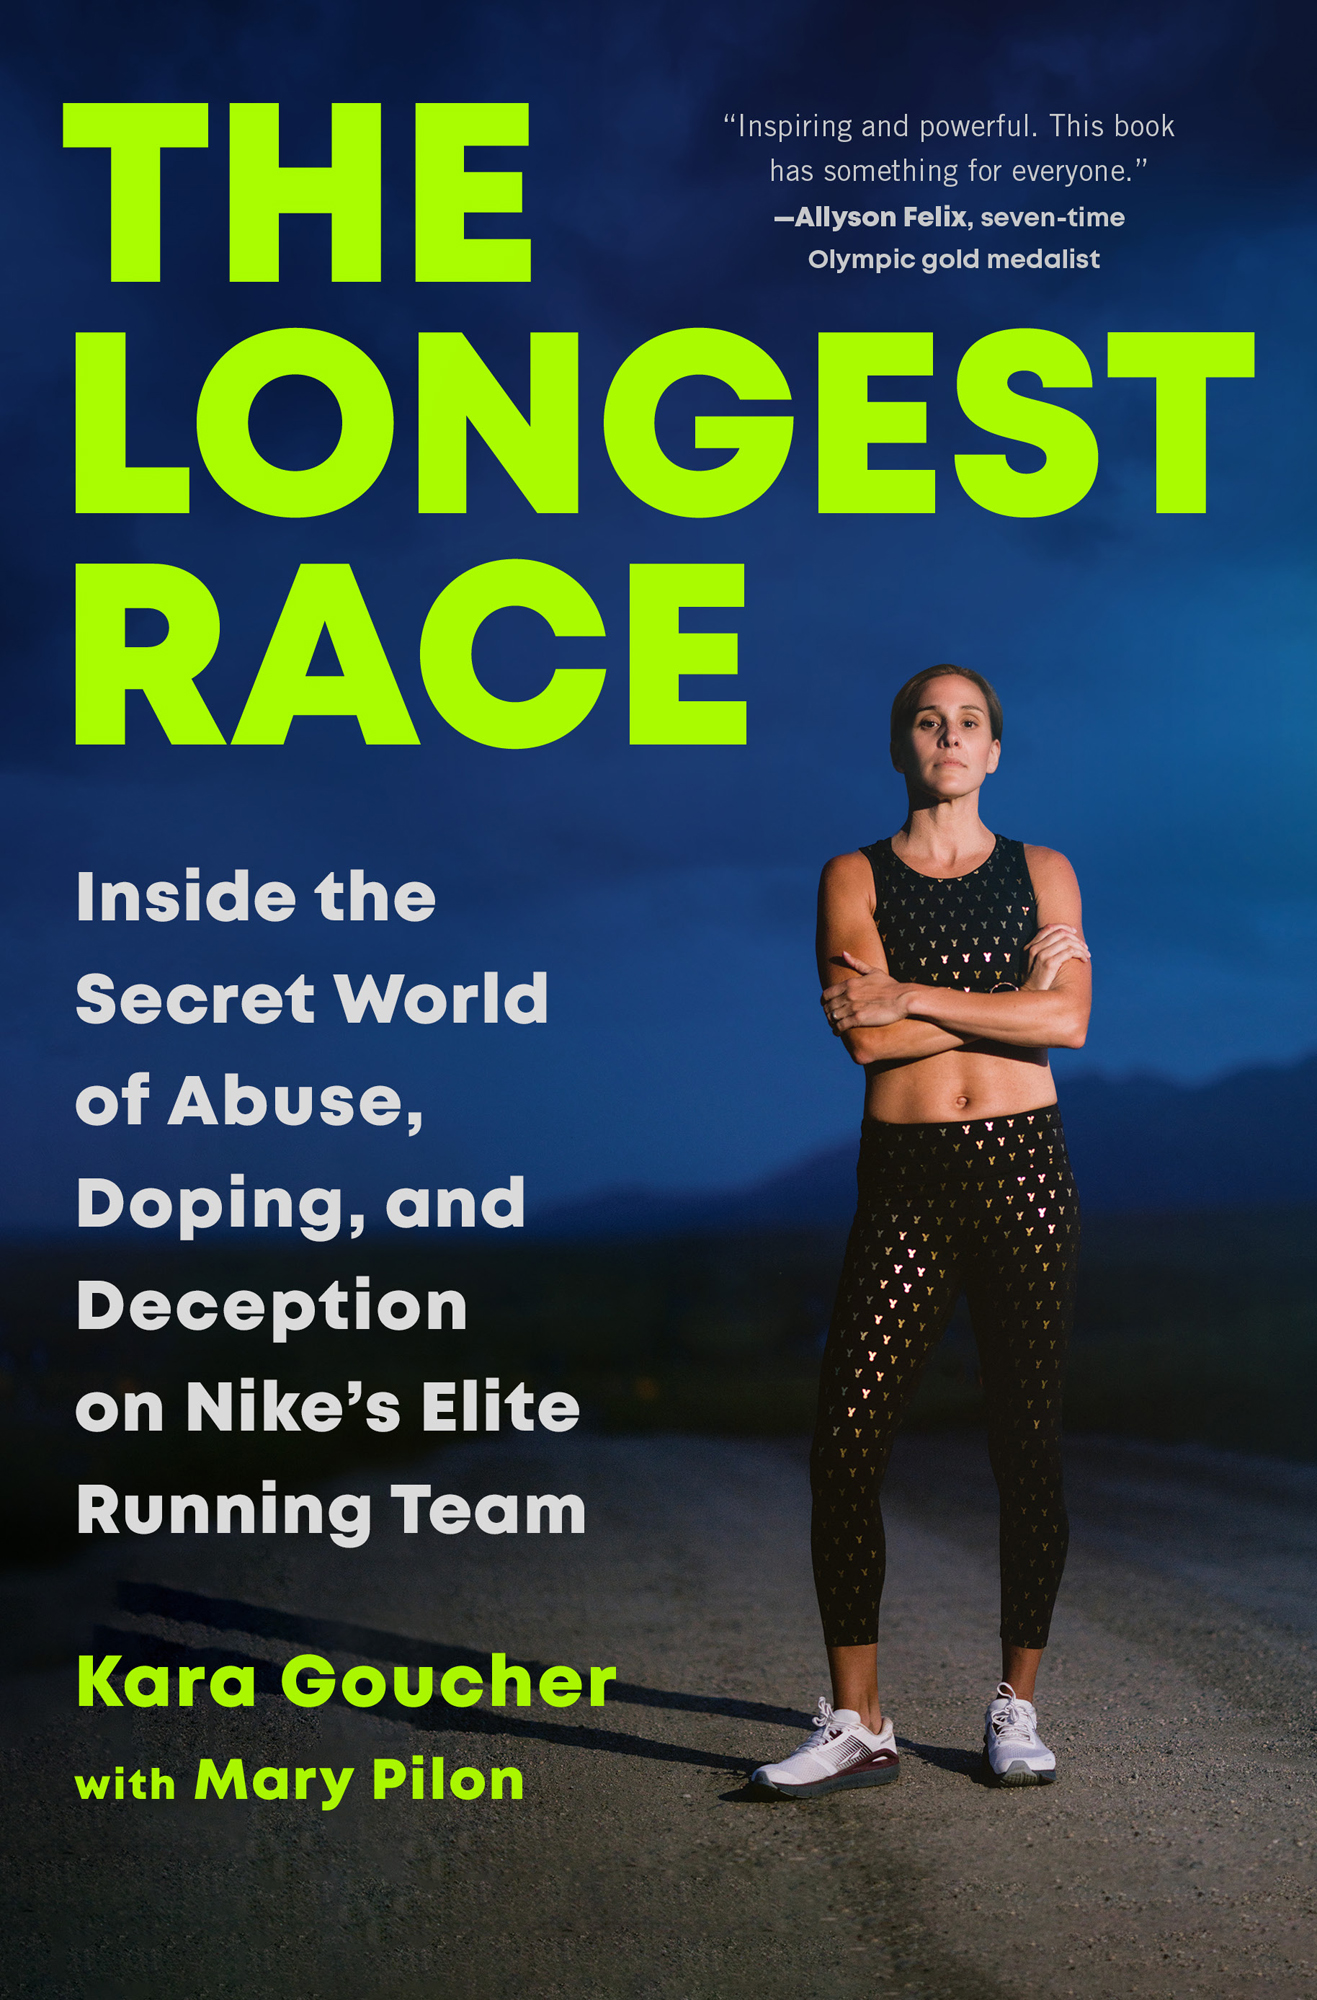 Inspiring and powerful This book has something for everyone Allyson Felix - photo 1